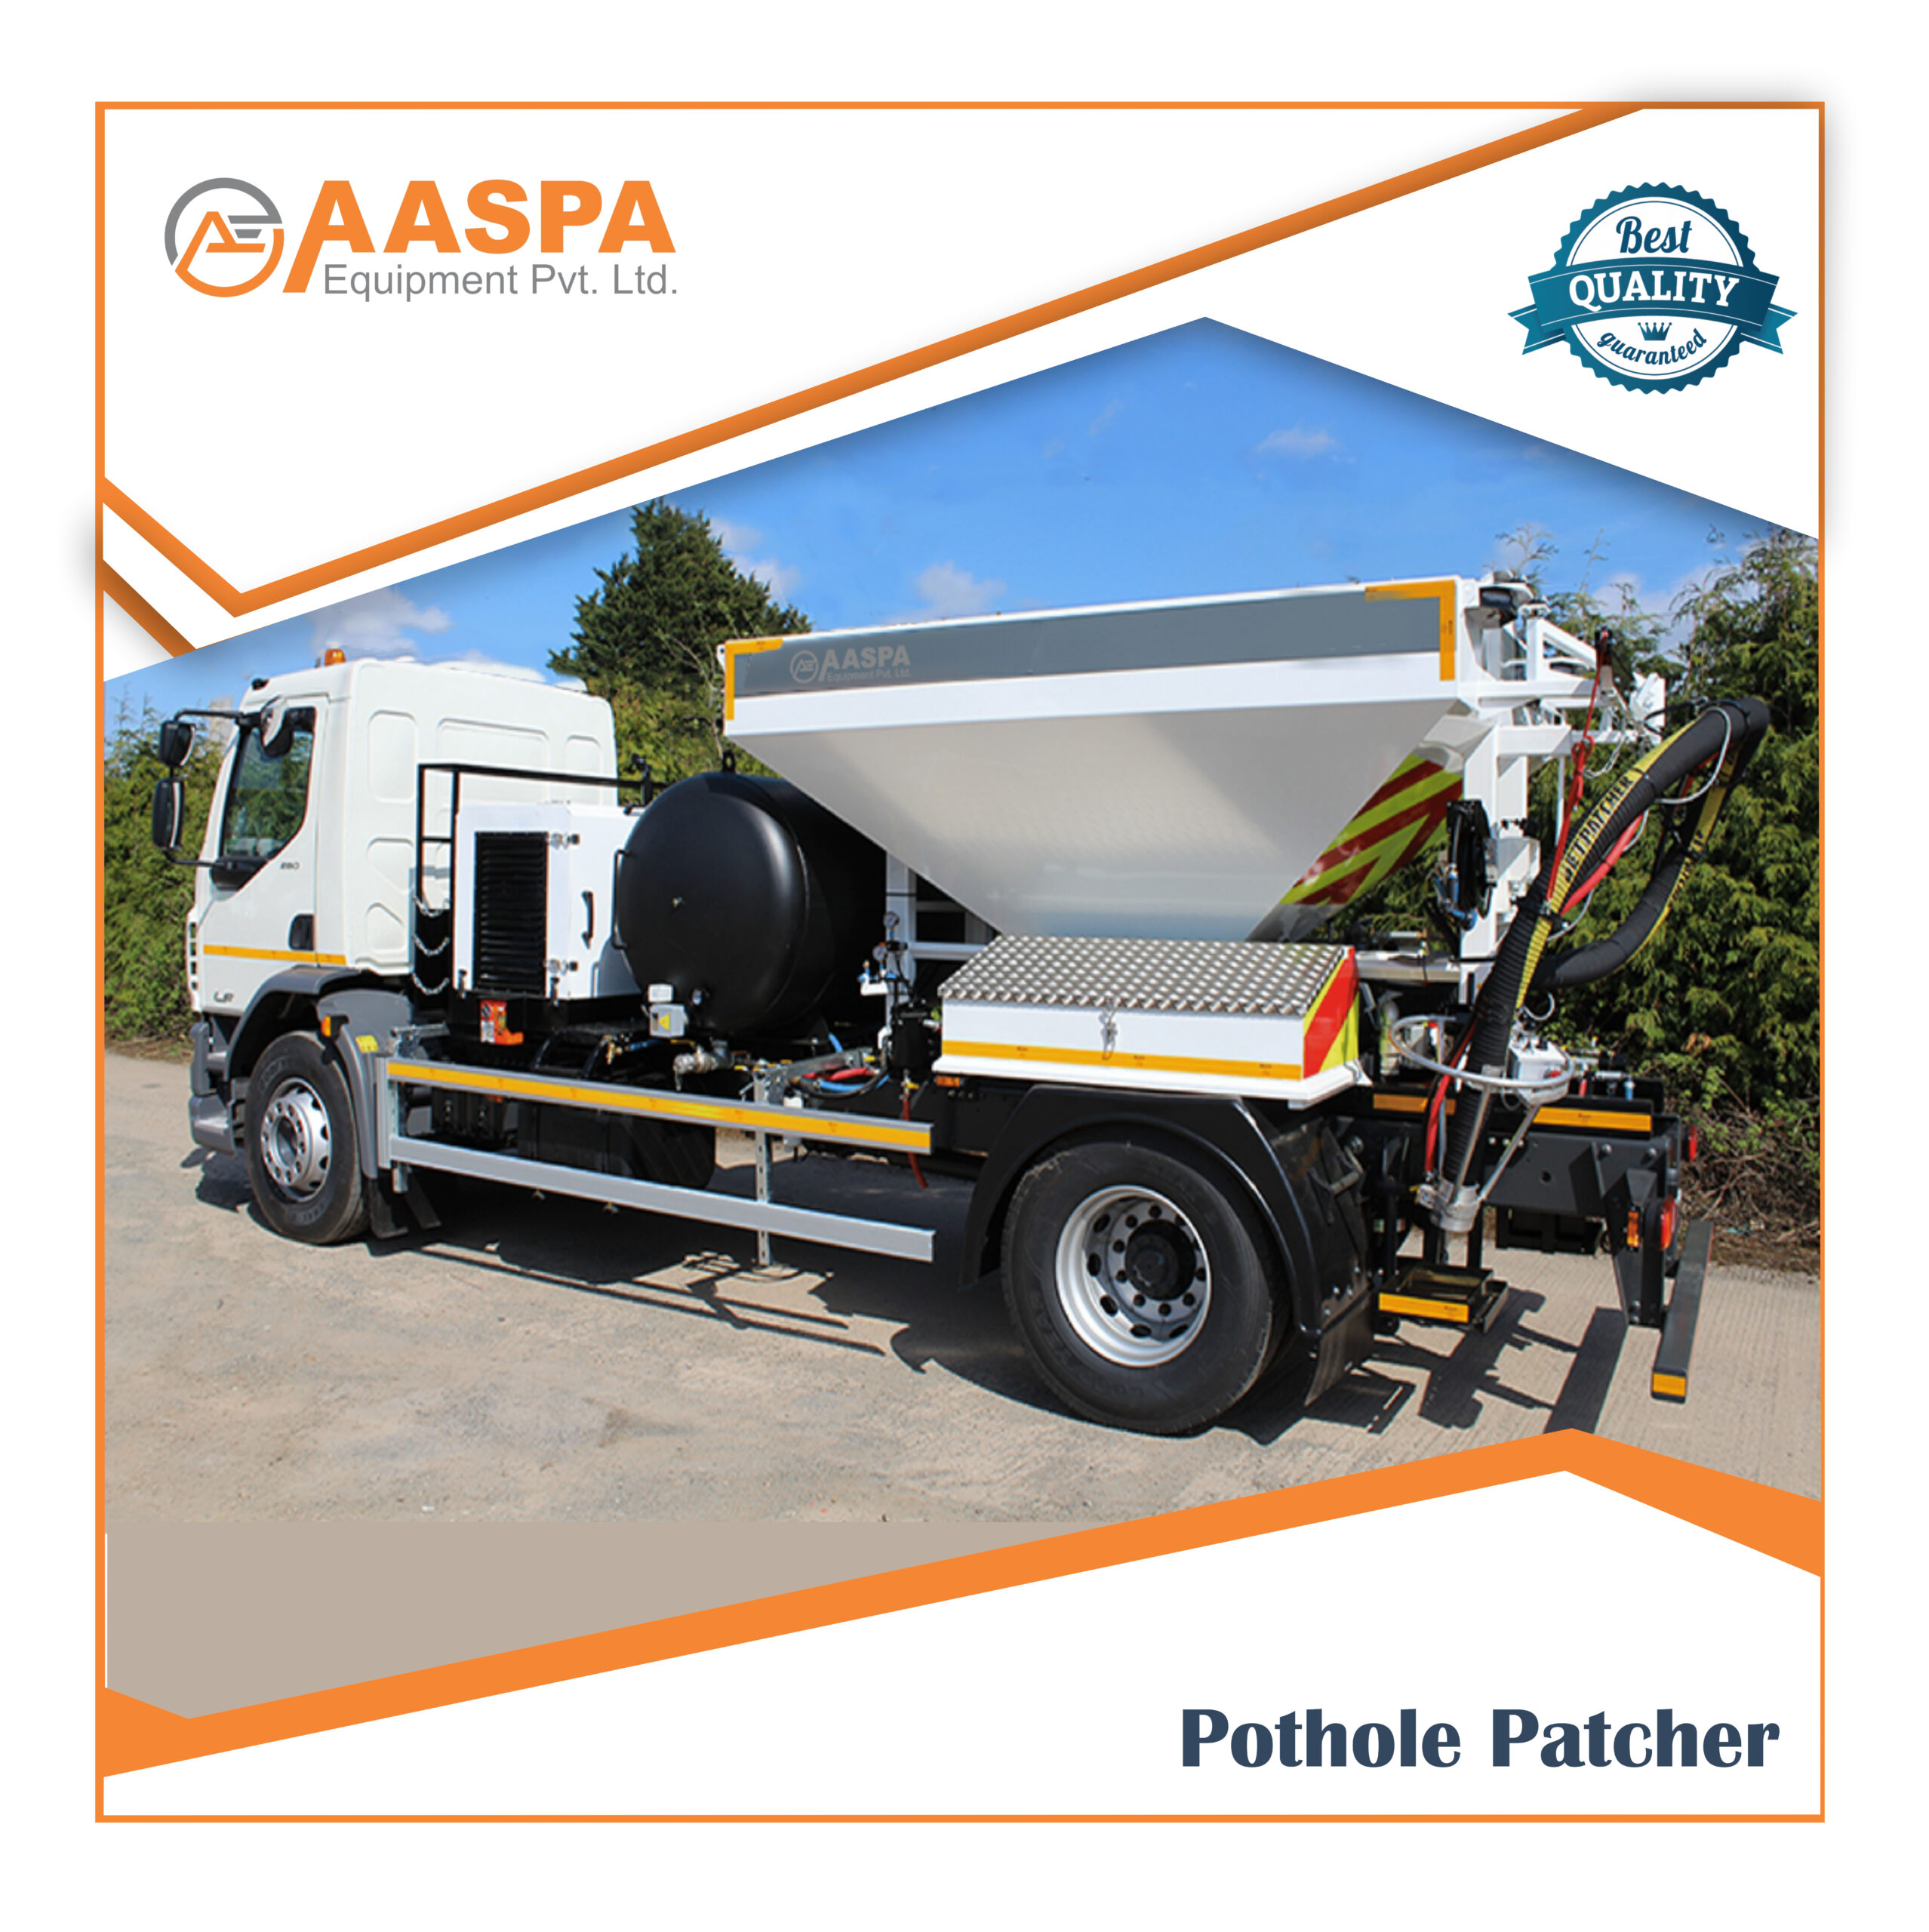 Pothole Patcher supplier in India